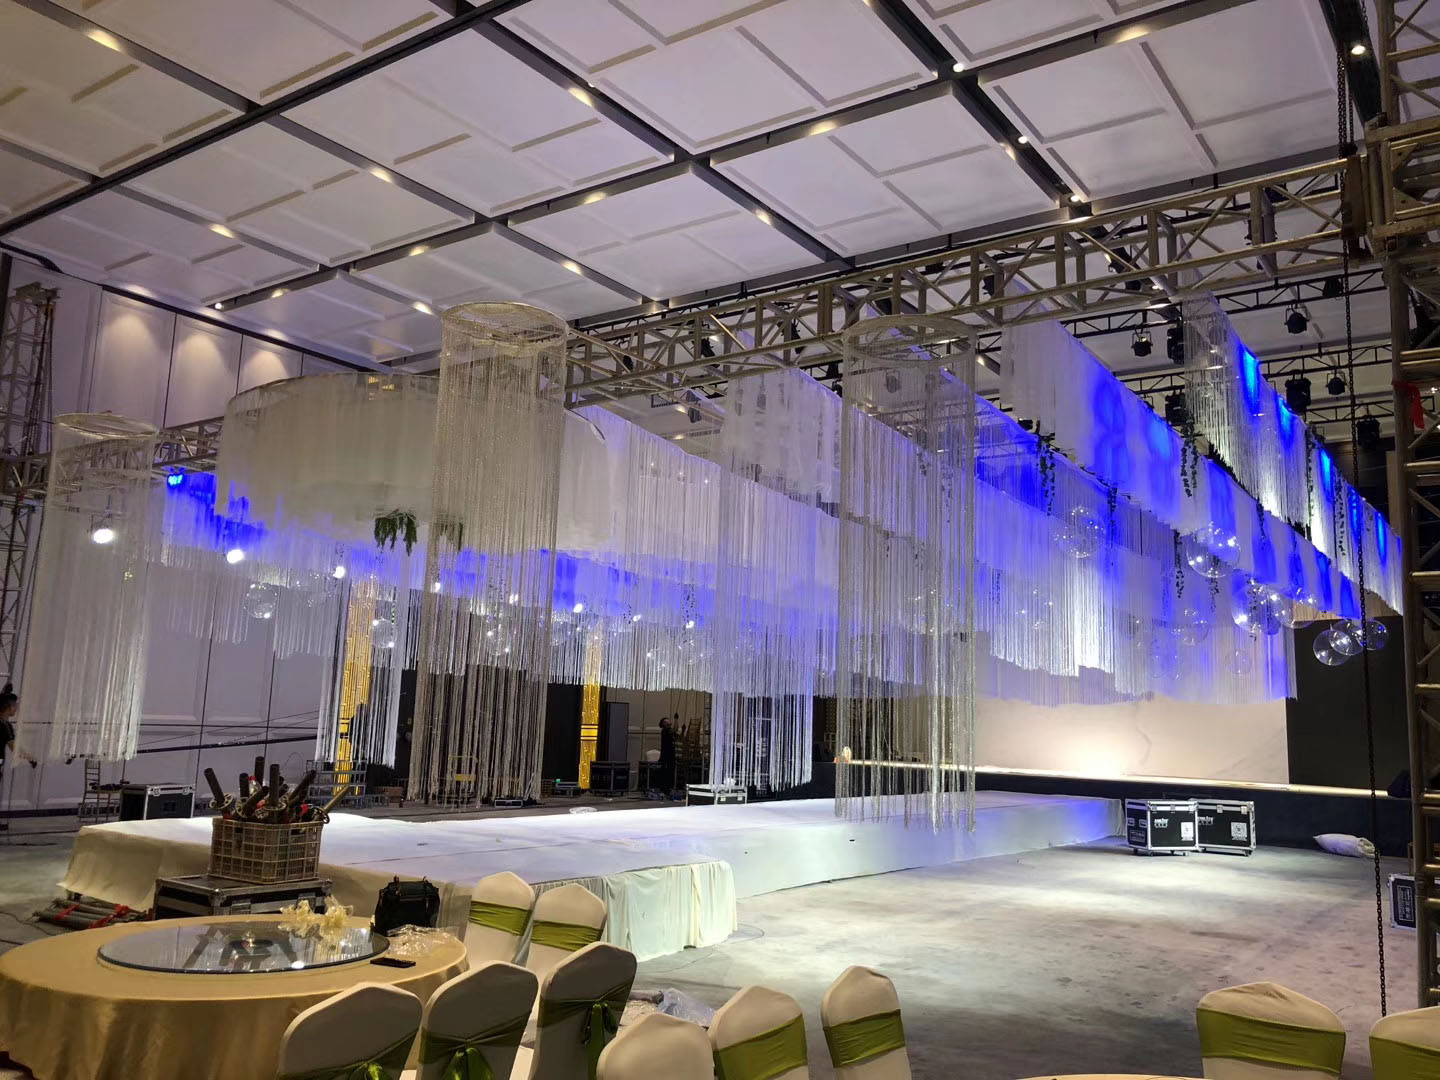 Stage electric hoist can enhance Christmas stage lighting equipment